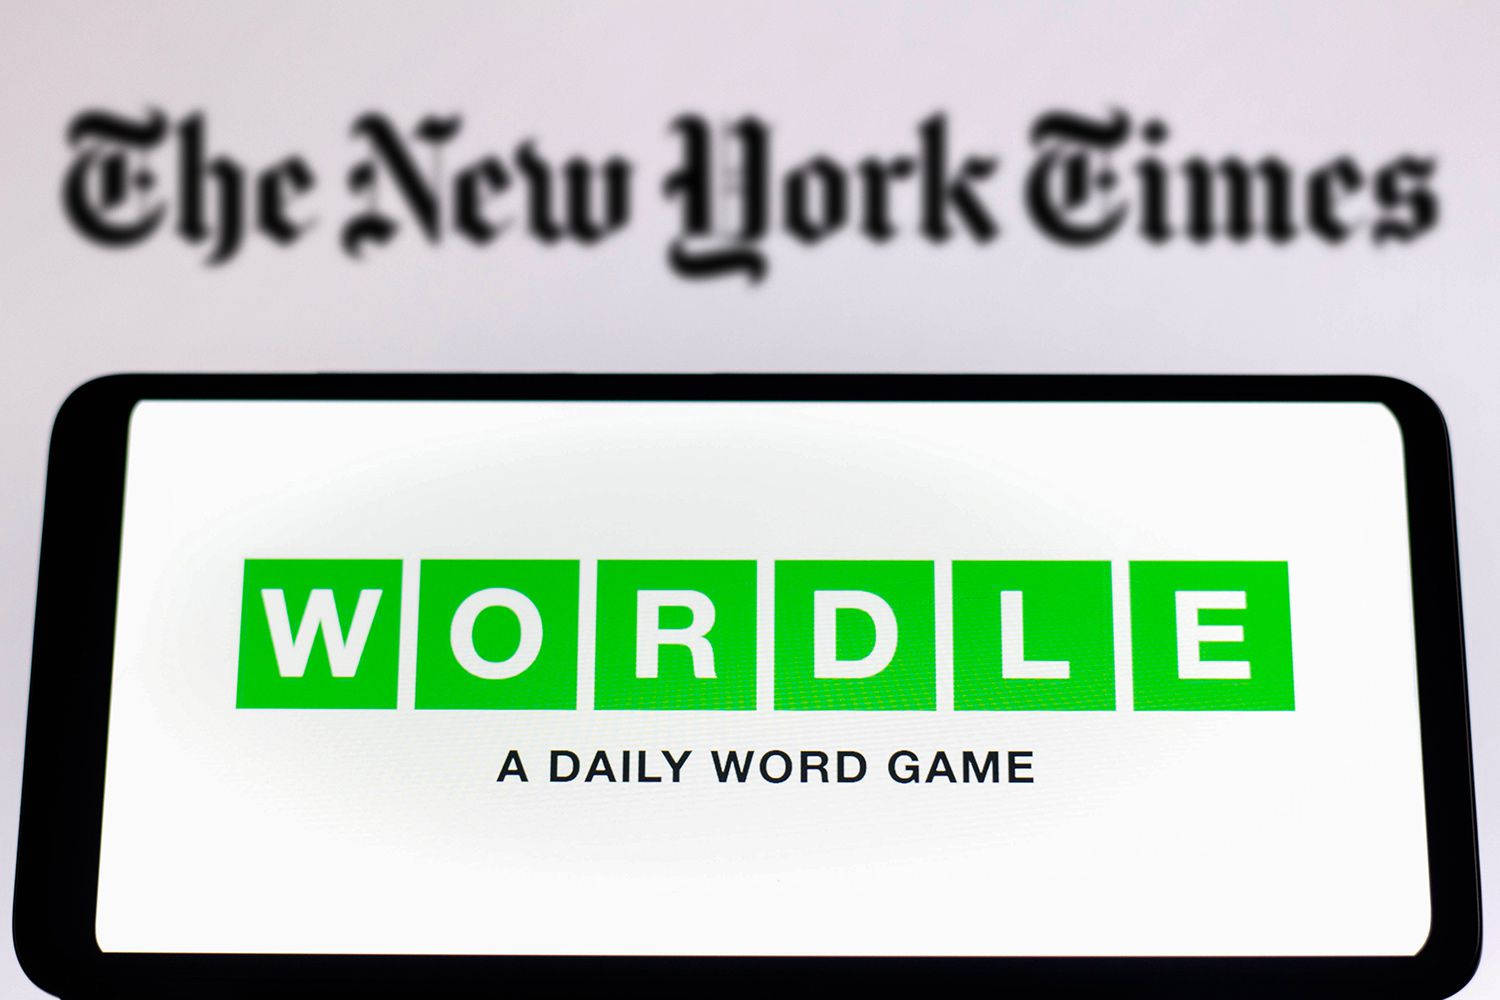 Caption: Engaging Wordle Game by The New York Times Wallpaper